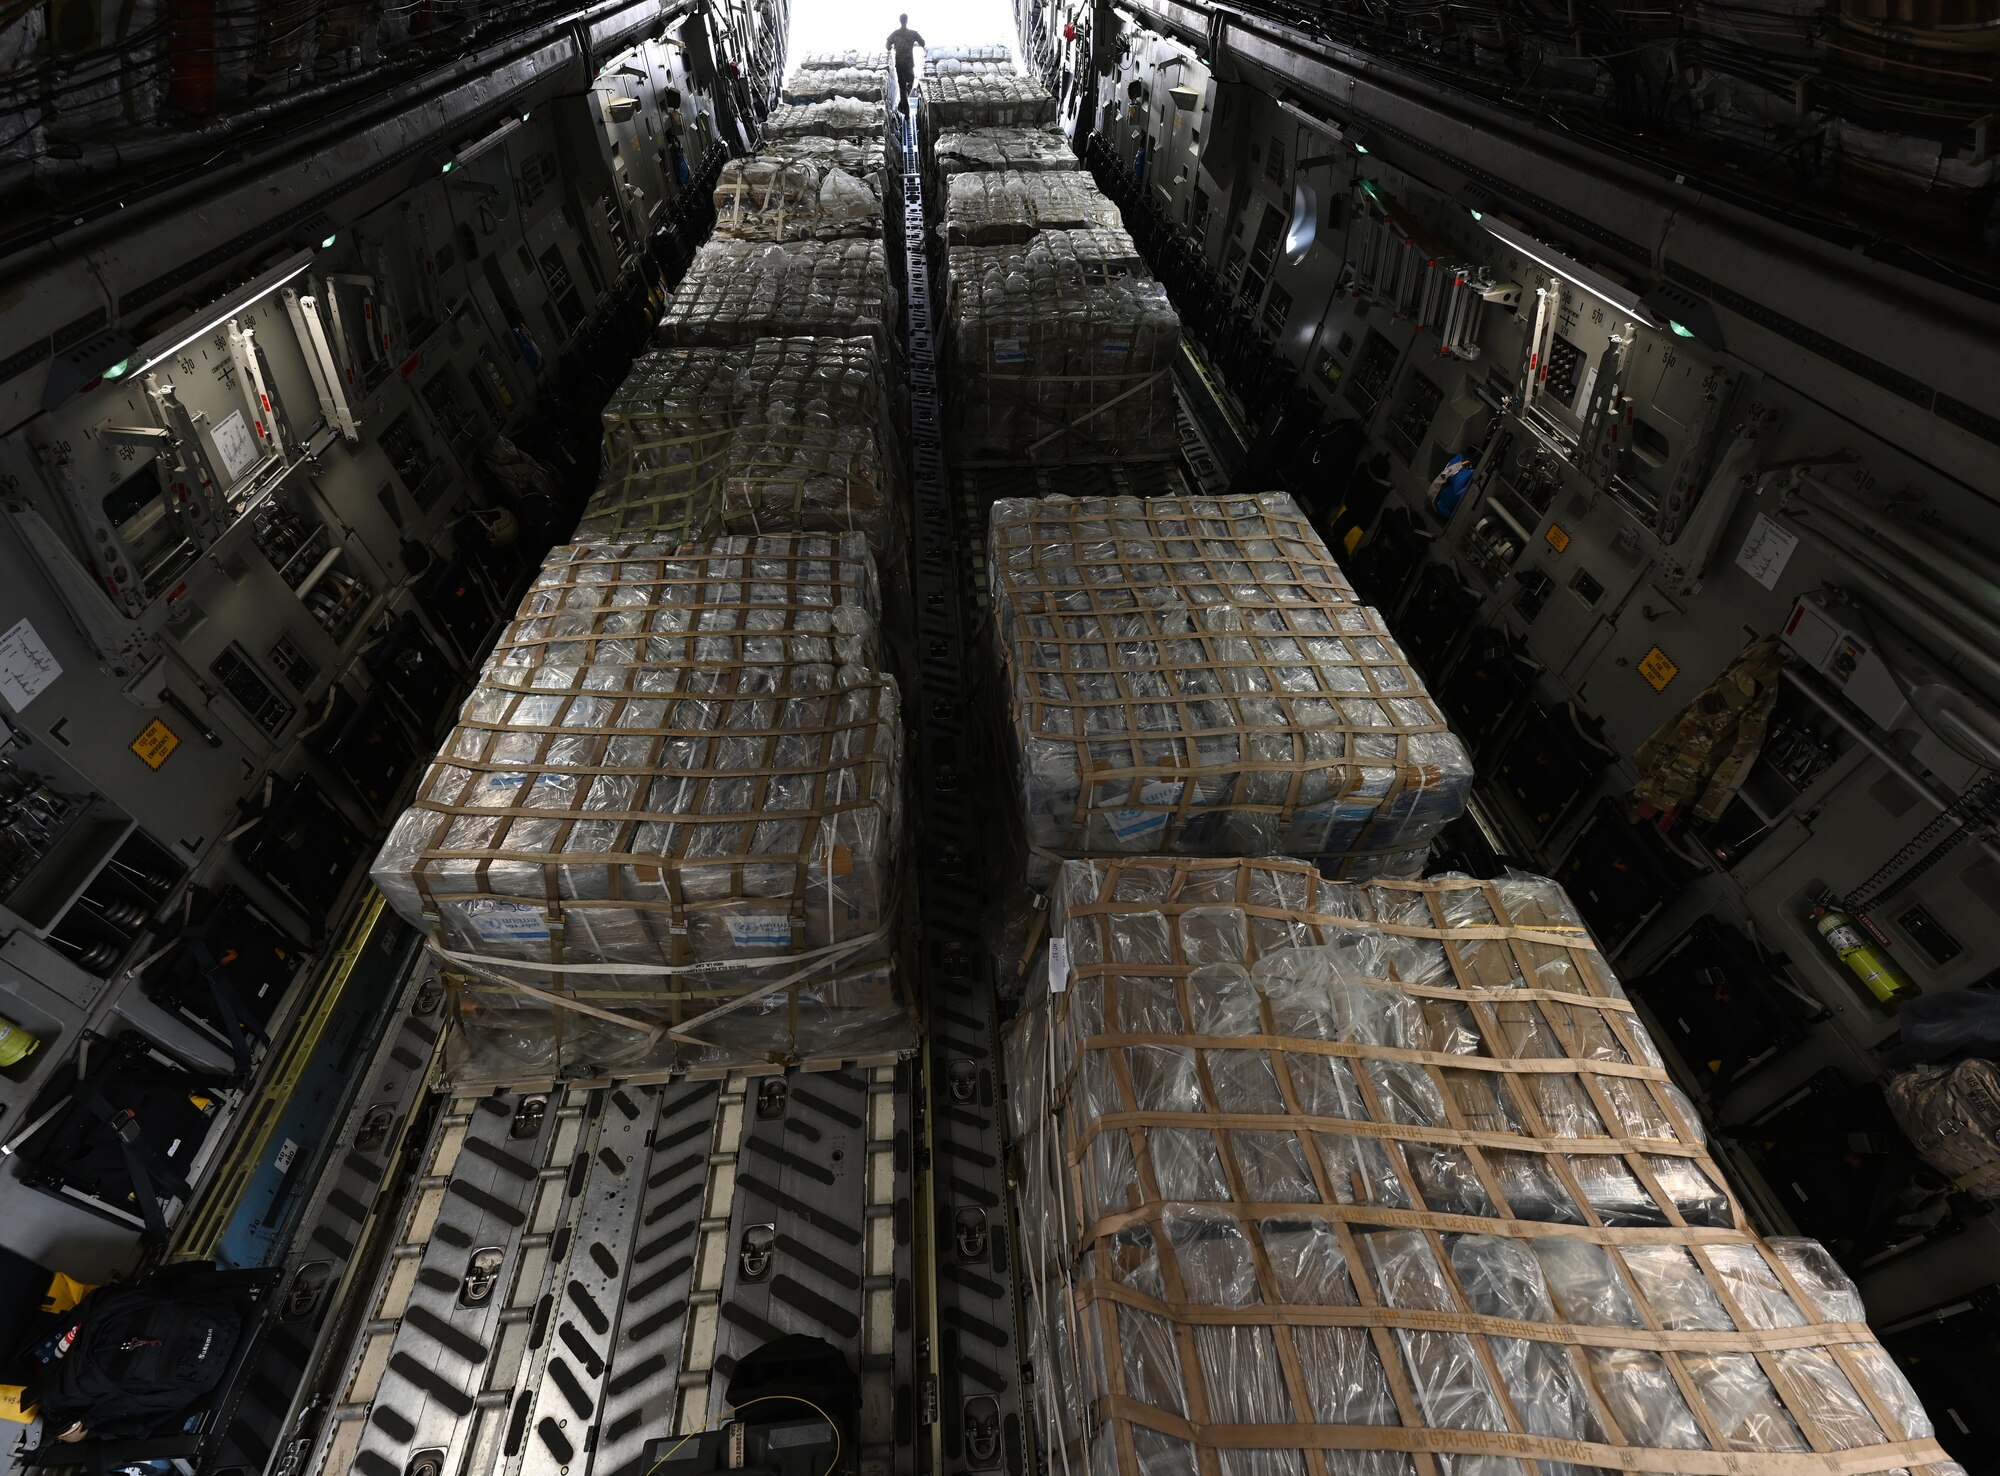 A C-17 carries more than 54,000 pounds of humanitarian supplies, food and nutrition assistance to the people of Gaza from undisclosed locations throughout the Middle East.